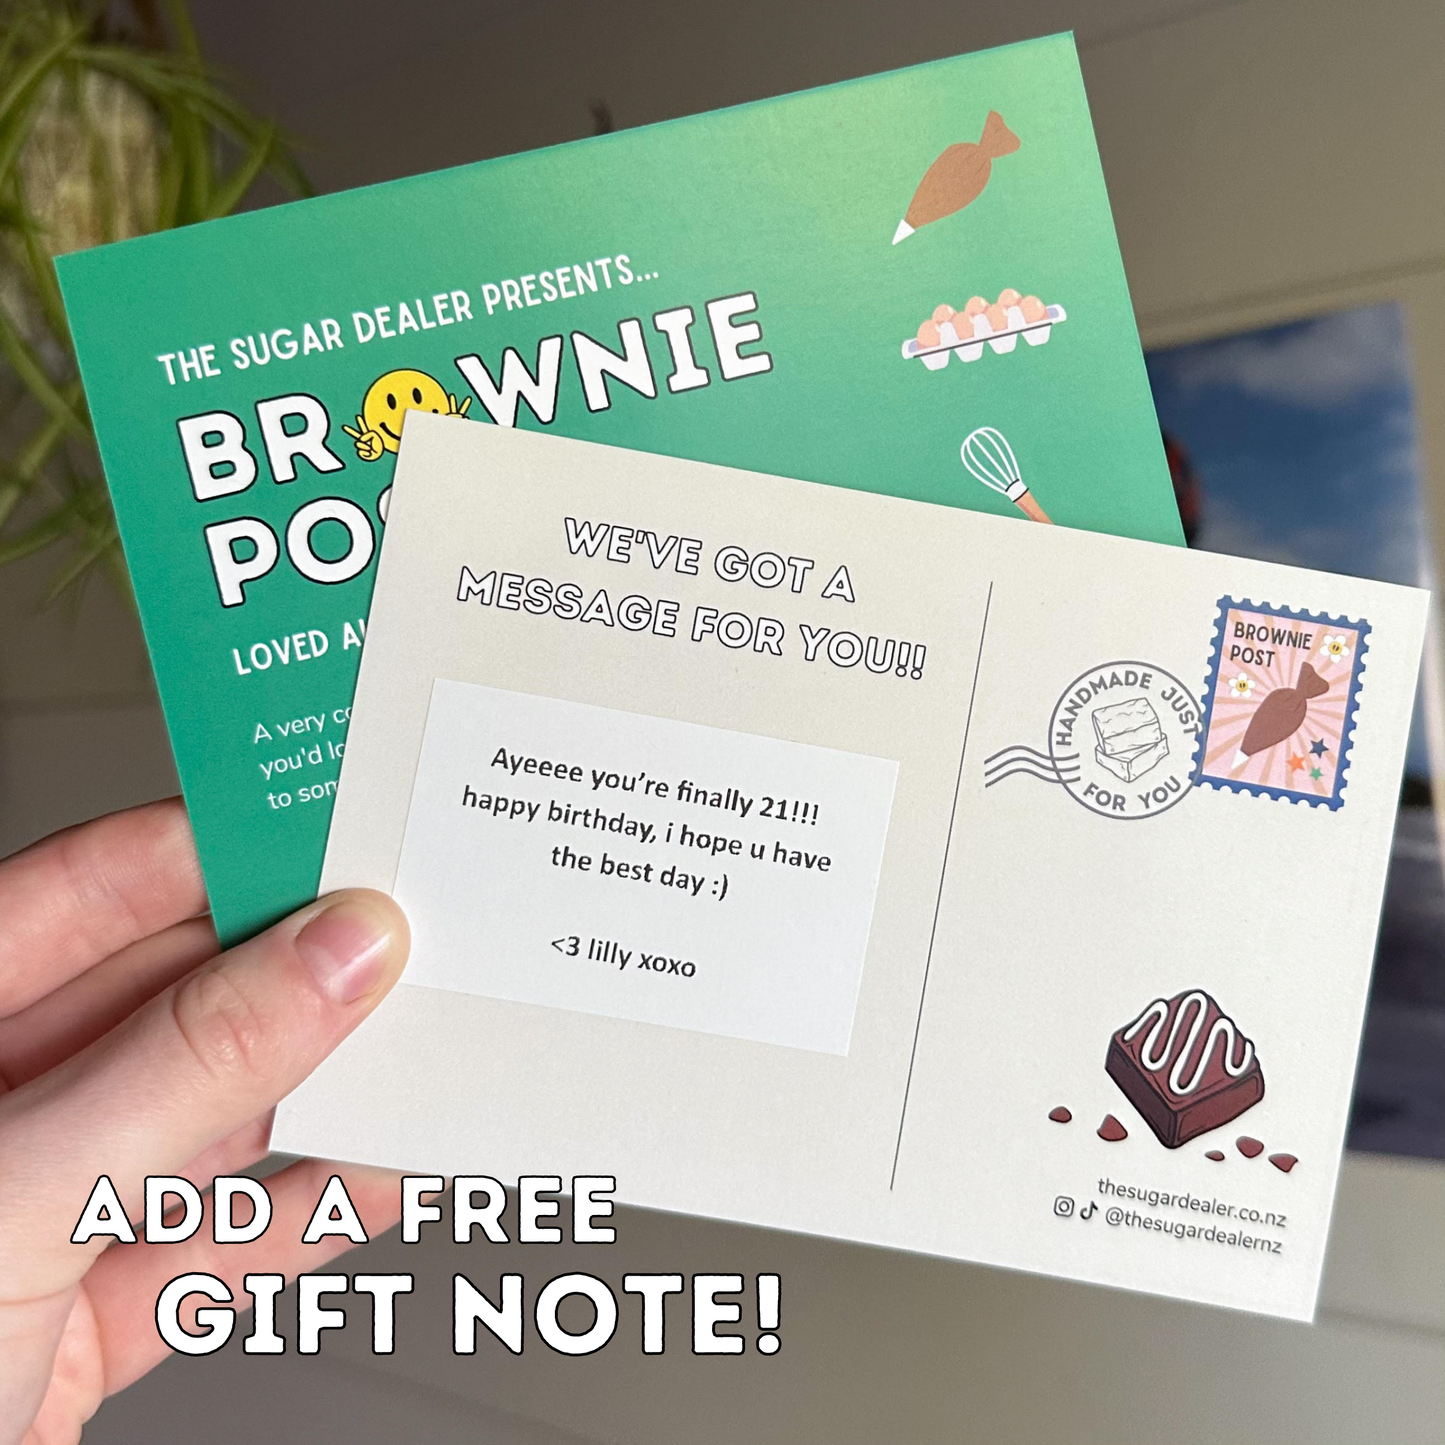 Gifting your brownie to someone? Add a free personalised gift note!